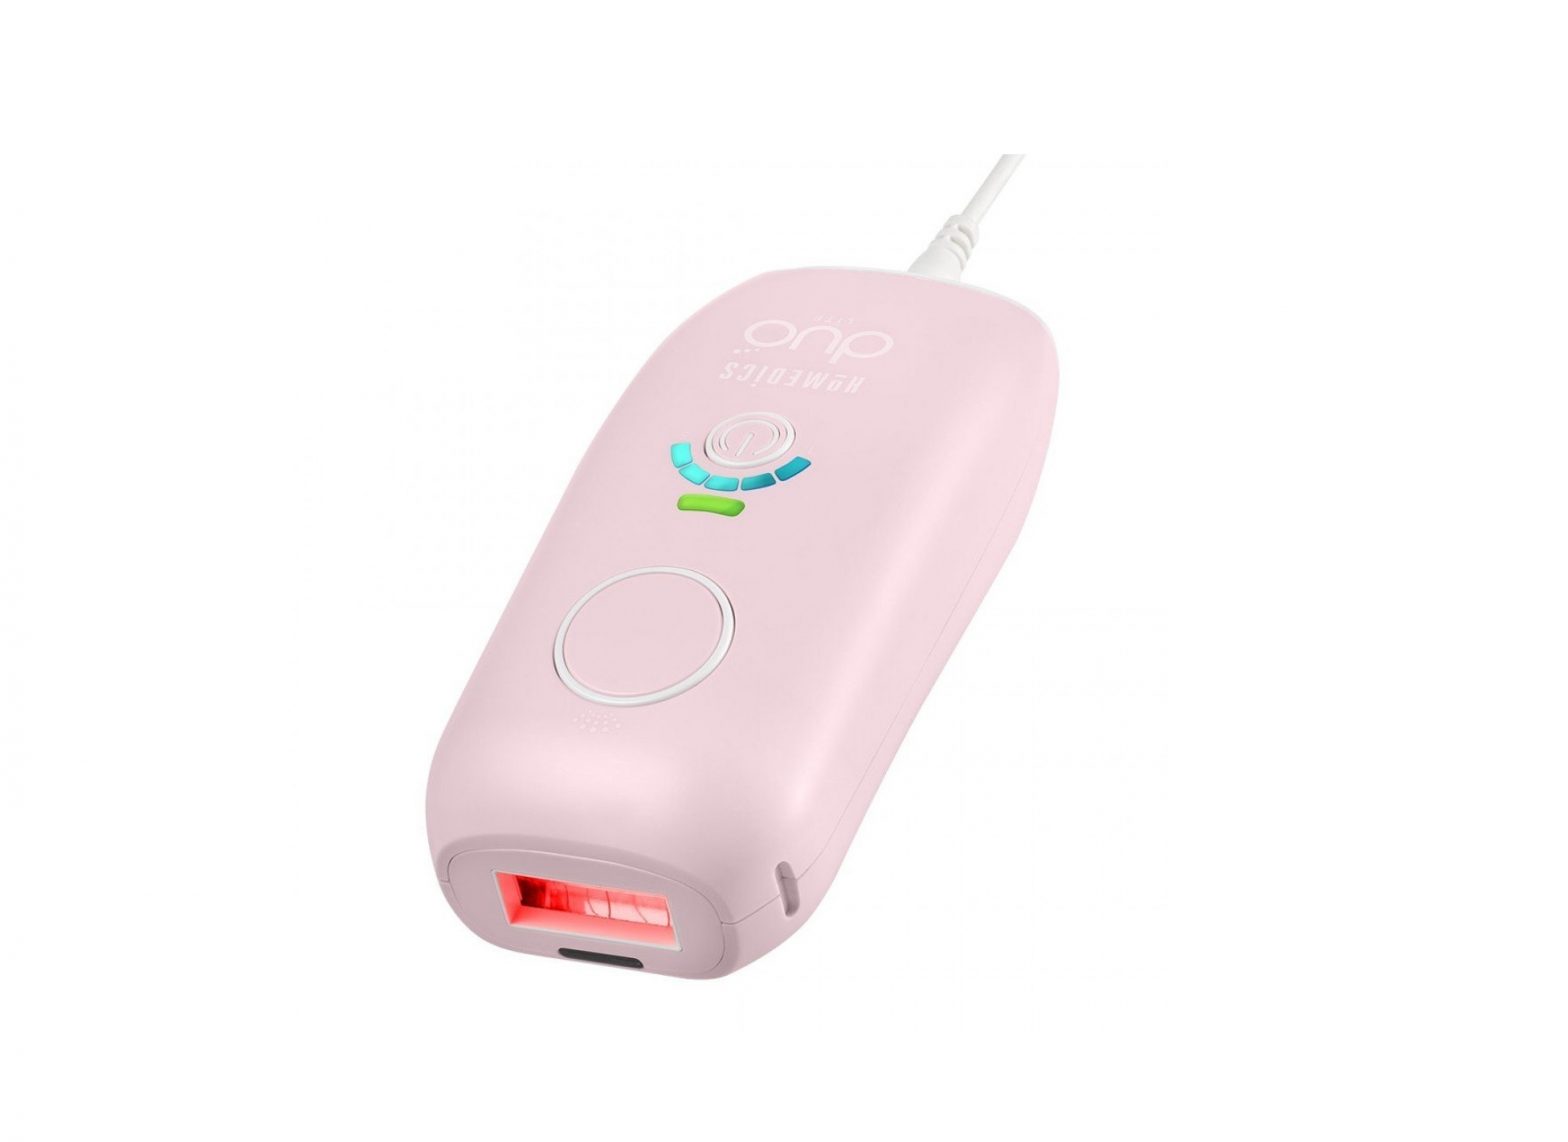 Homedics IPL-HH180 Duo Lite Permanent Hair Reduction Instruction Manual and Warranty Information